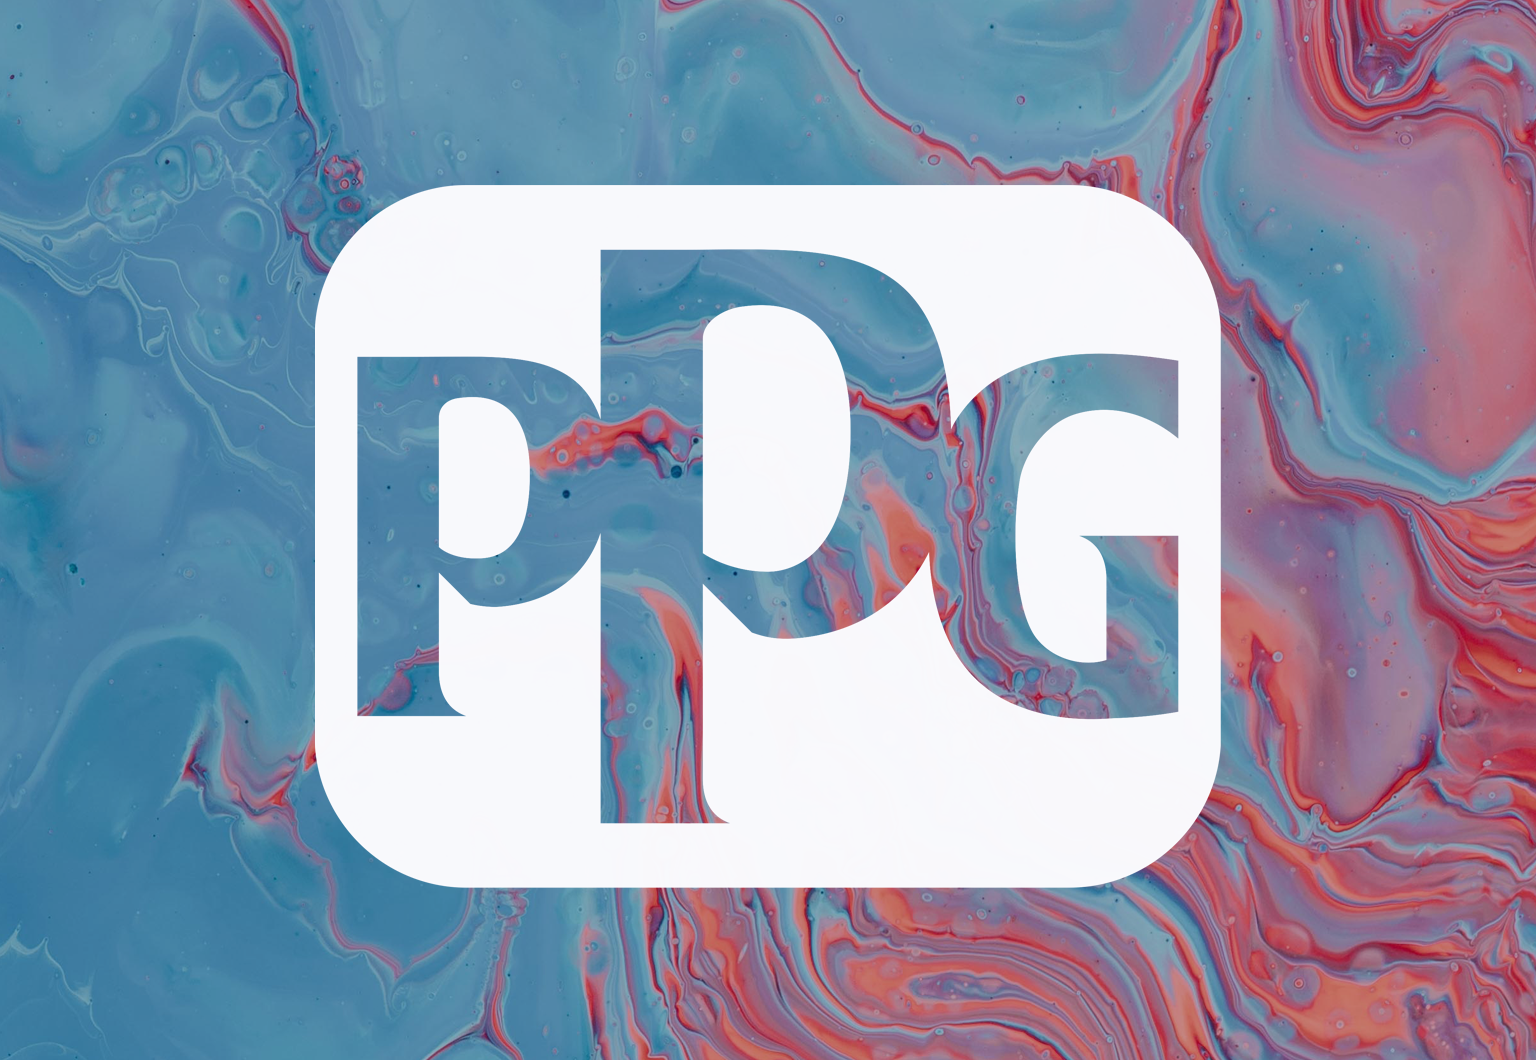 Blue and pink paint with 'PPG' written over the top of the image